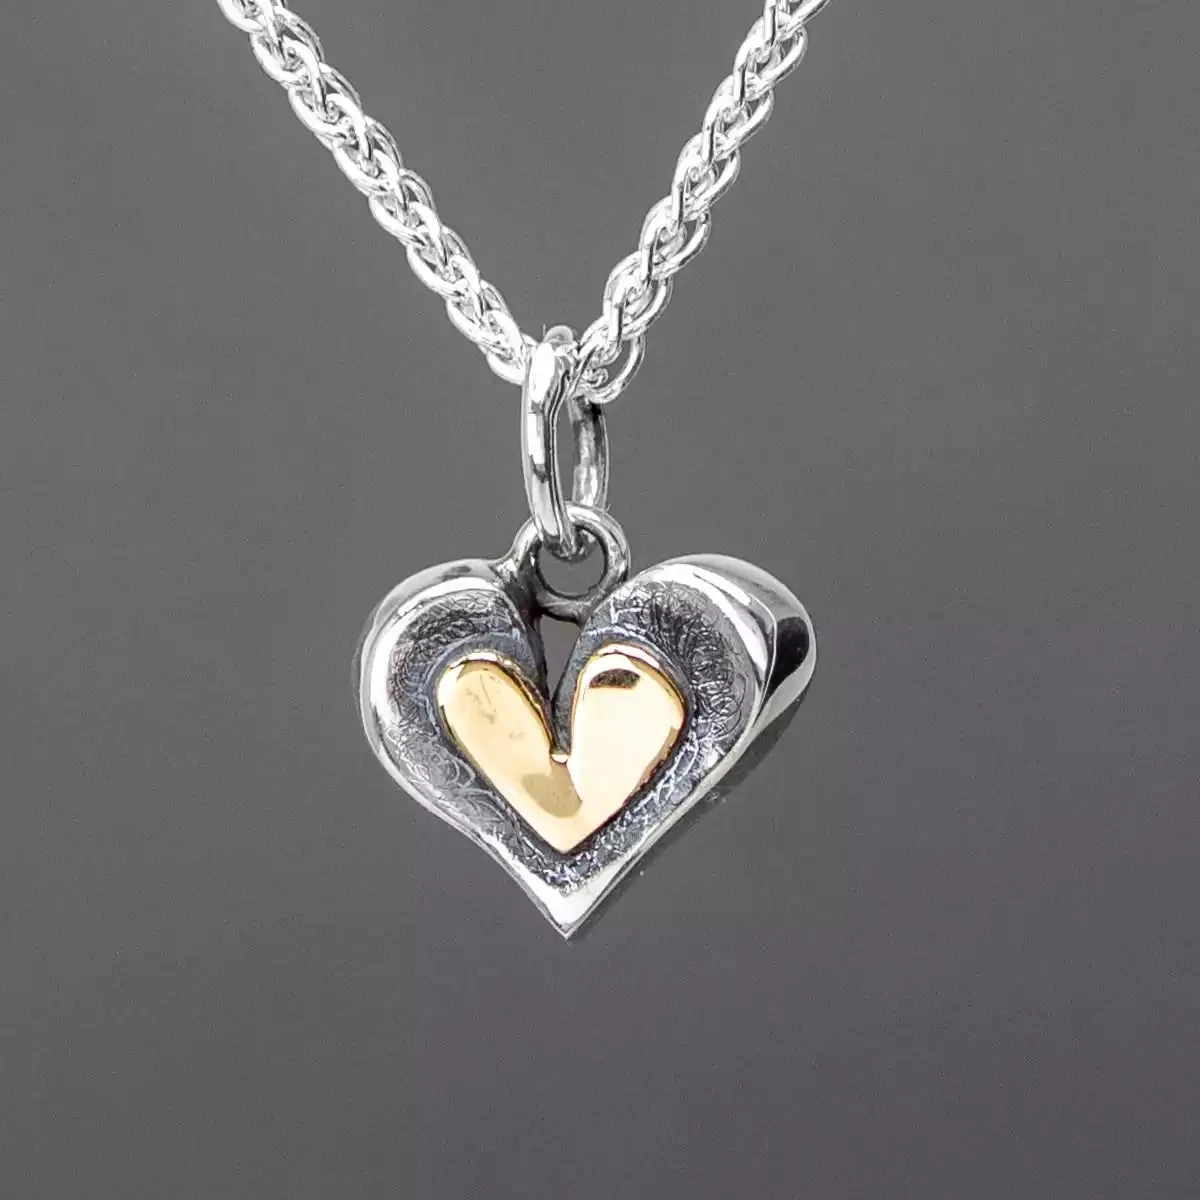 Lucky Penny Heart Silver and Gold Pendant by Linda Macdonald